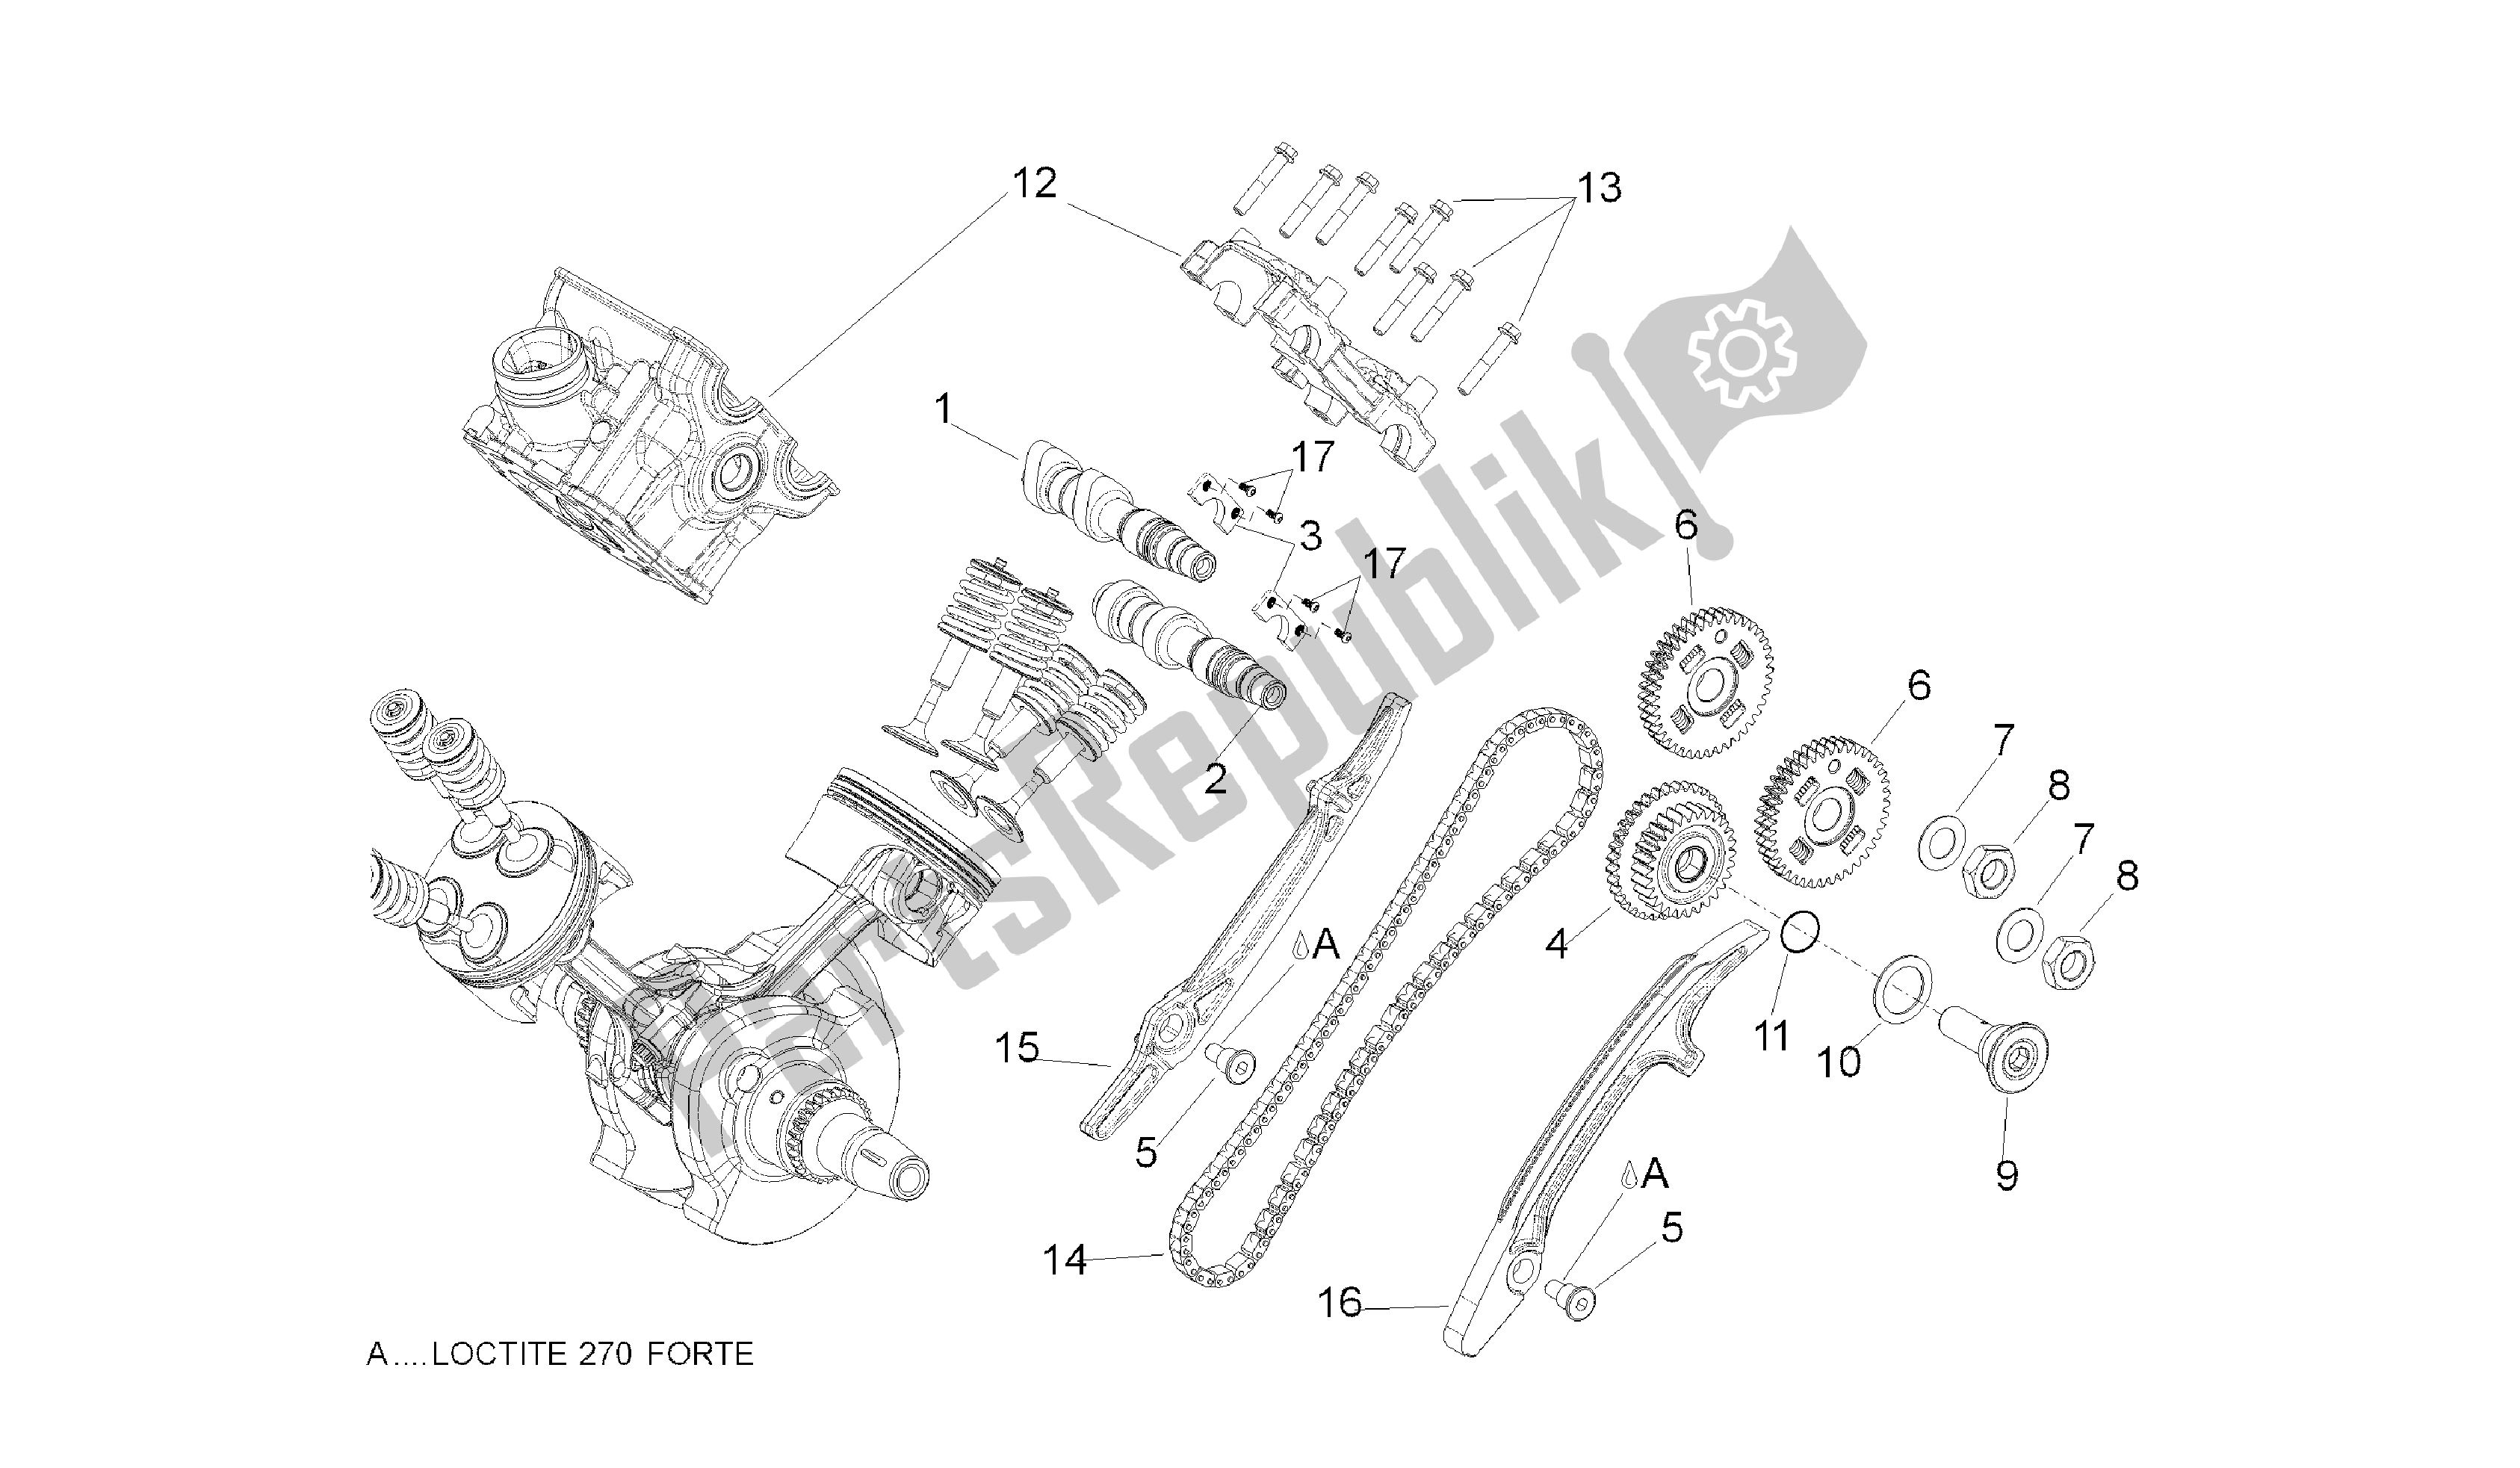 All parts for the Rear Cylinder Timing System of the Aprilia Dorsoduro 750 2010